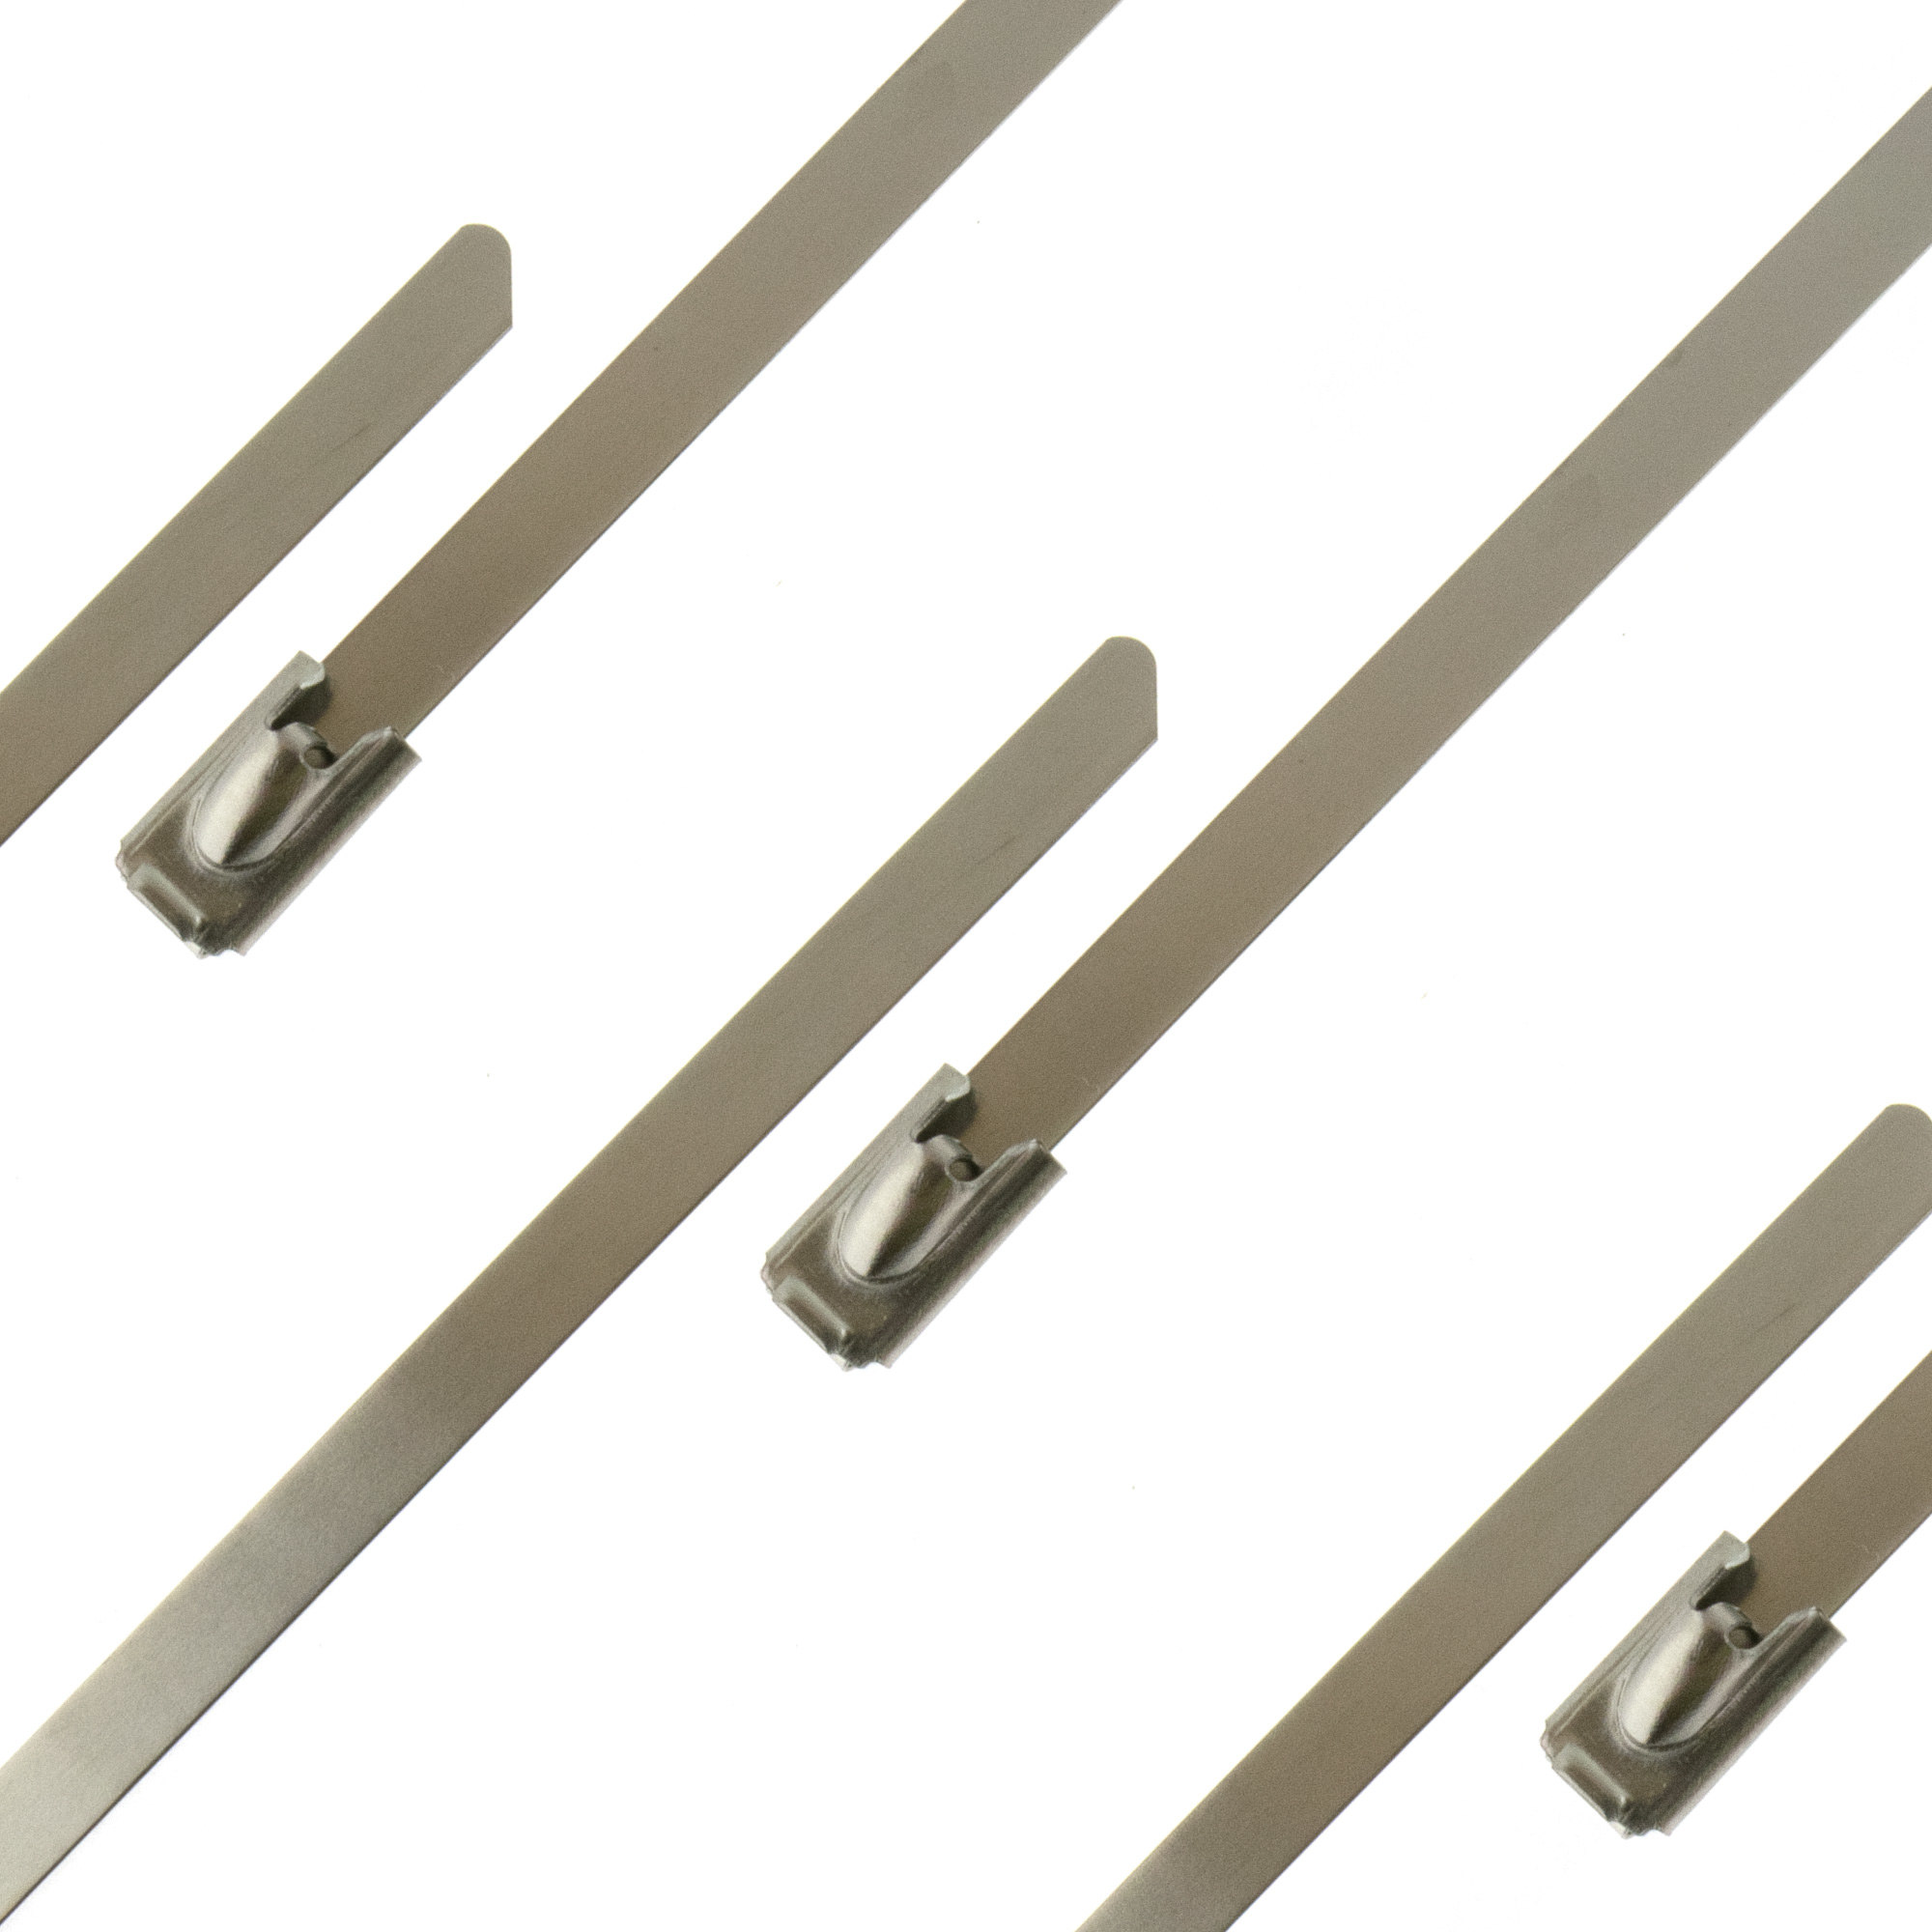 Cable tie metal ball-lock 300 x 4,6mm, 100PCS